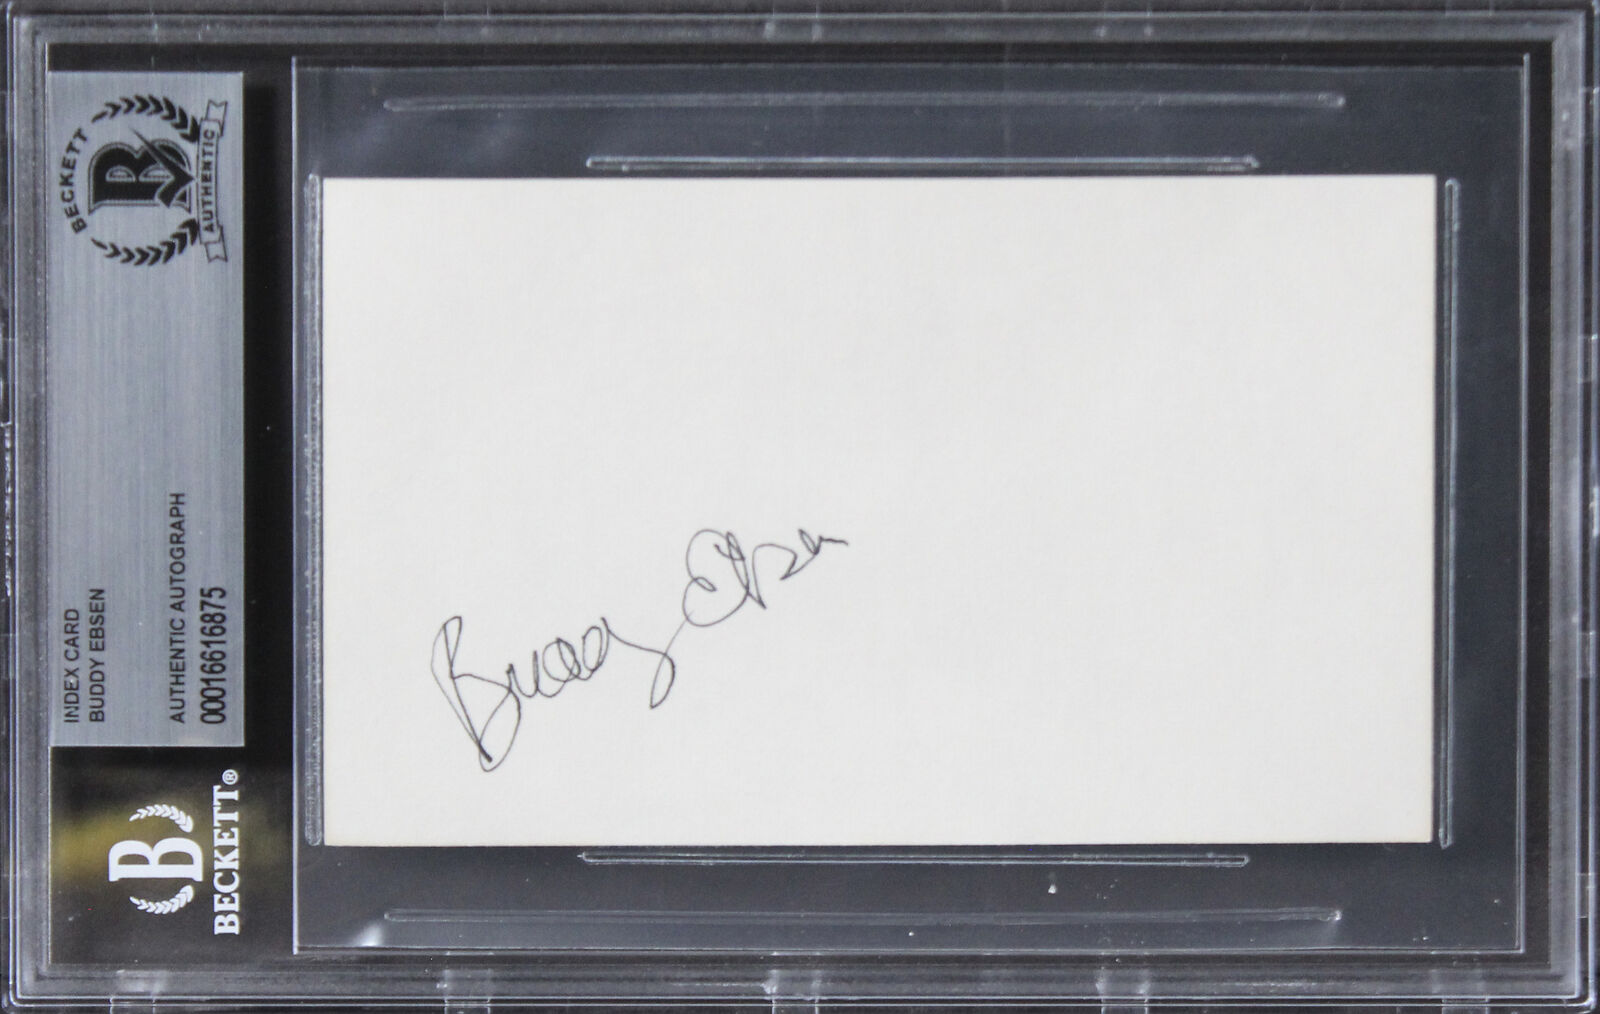 Buddy Ebsen Breakfast At Tiffany\'s Authentic Signed 3x5 Index Card BAS Slabbed 1